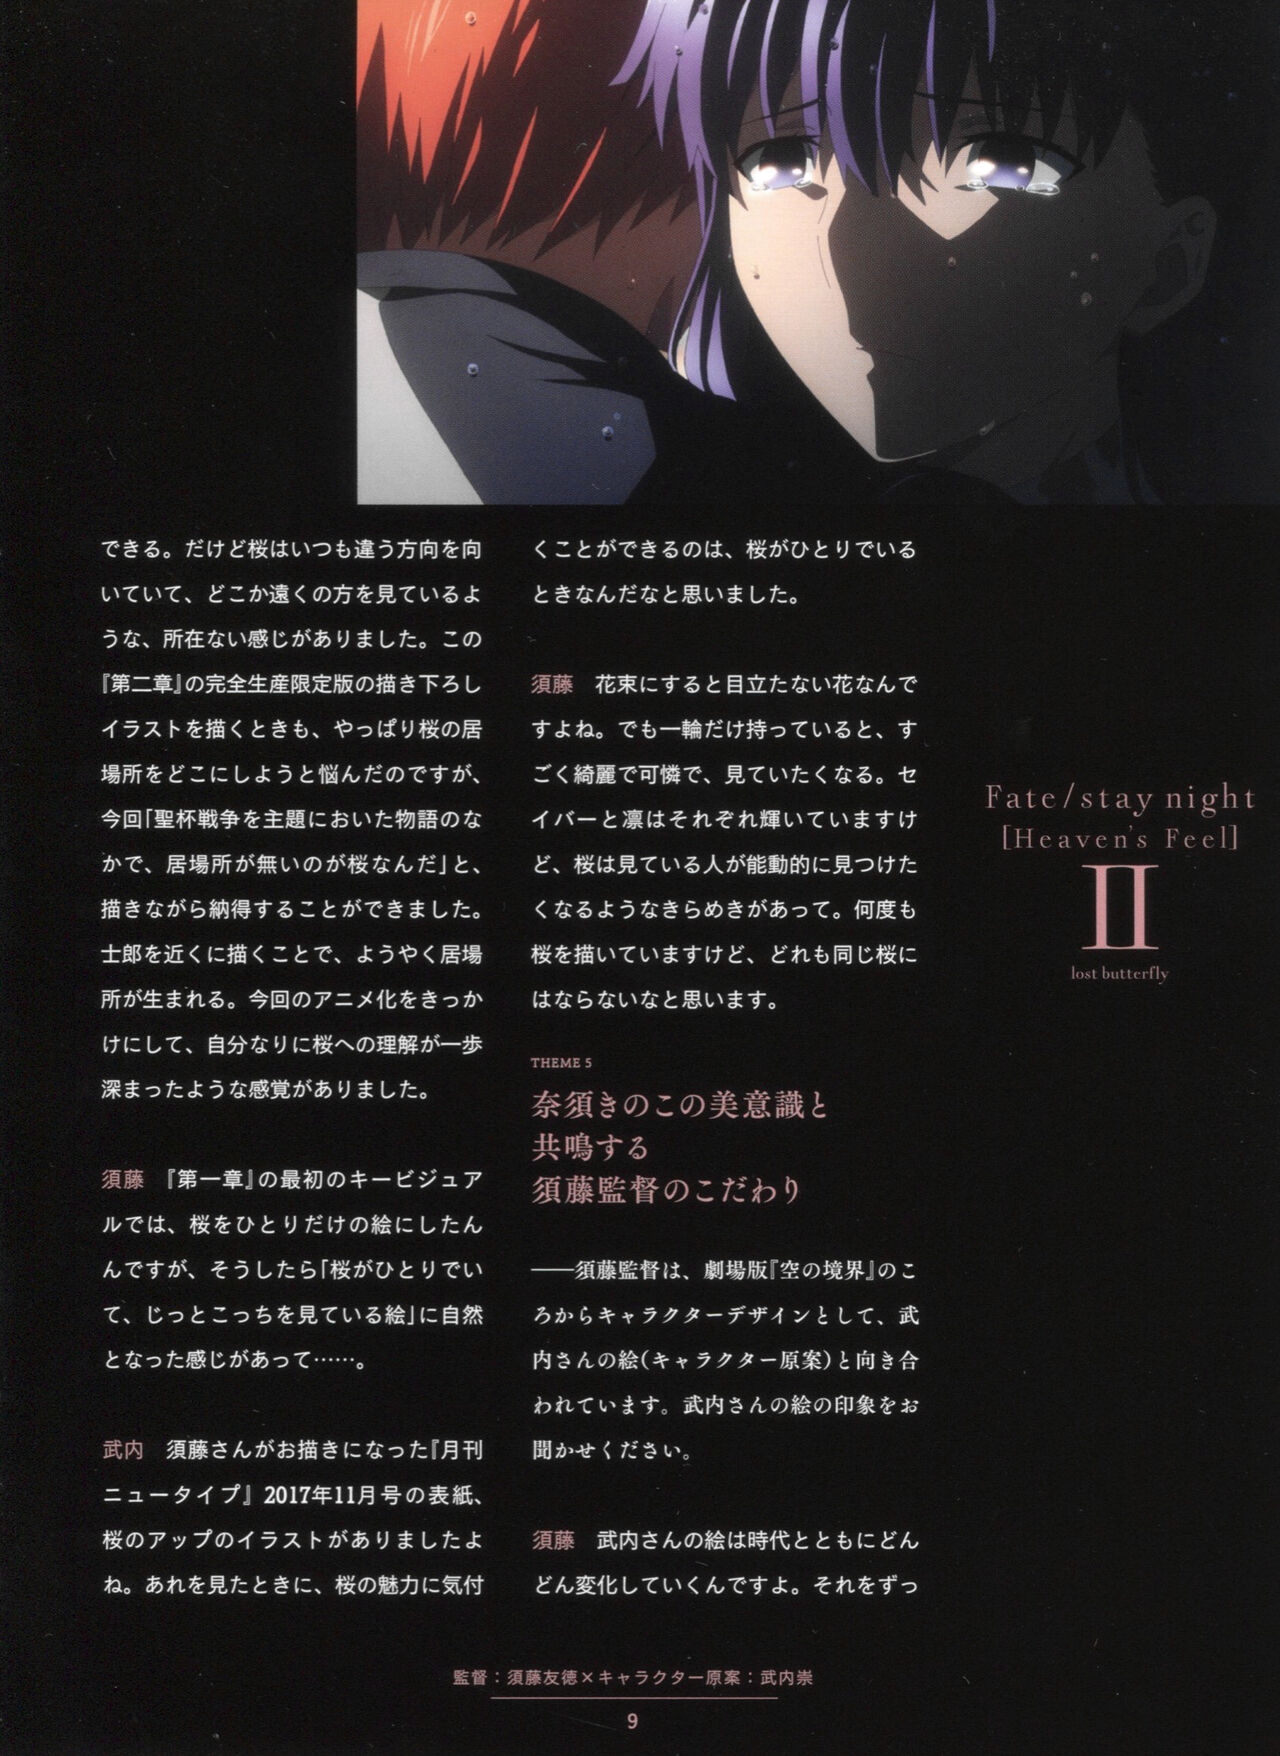 Fate/Stay Night: Heaven's Feel II - Lost Butterfly Animation Material 8